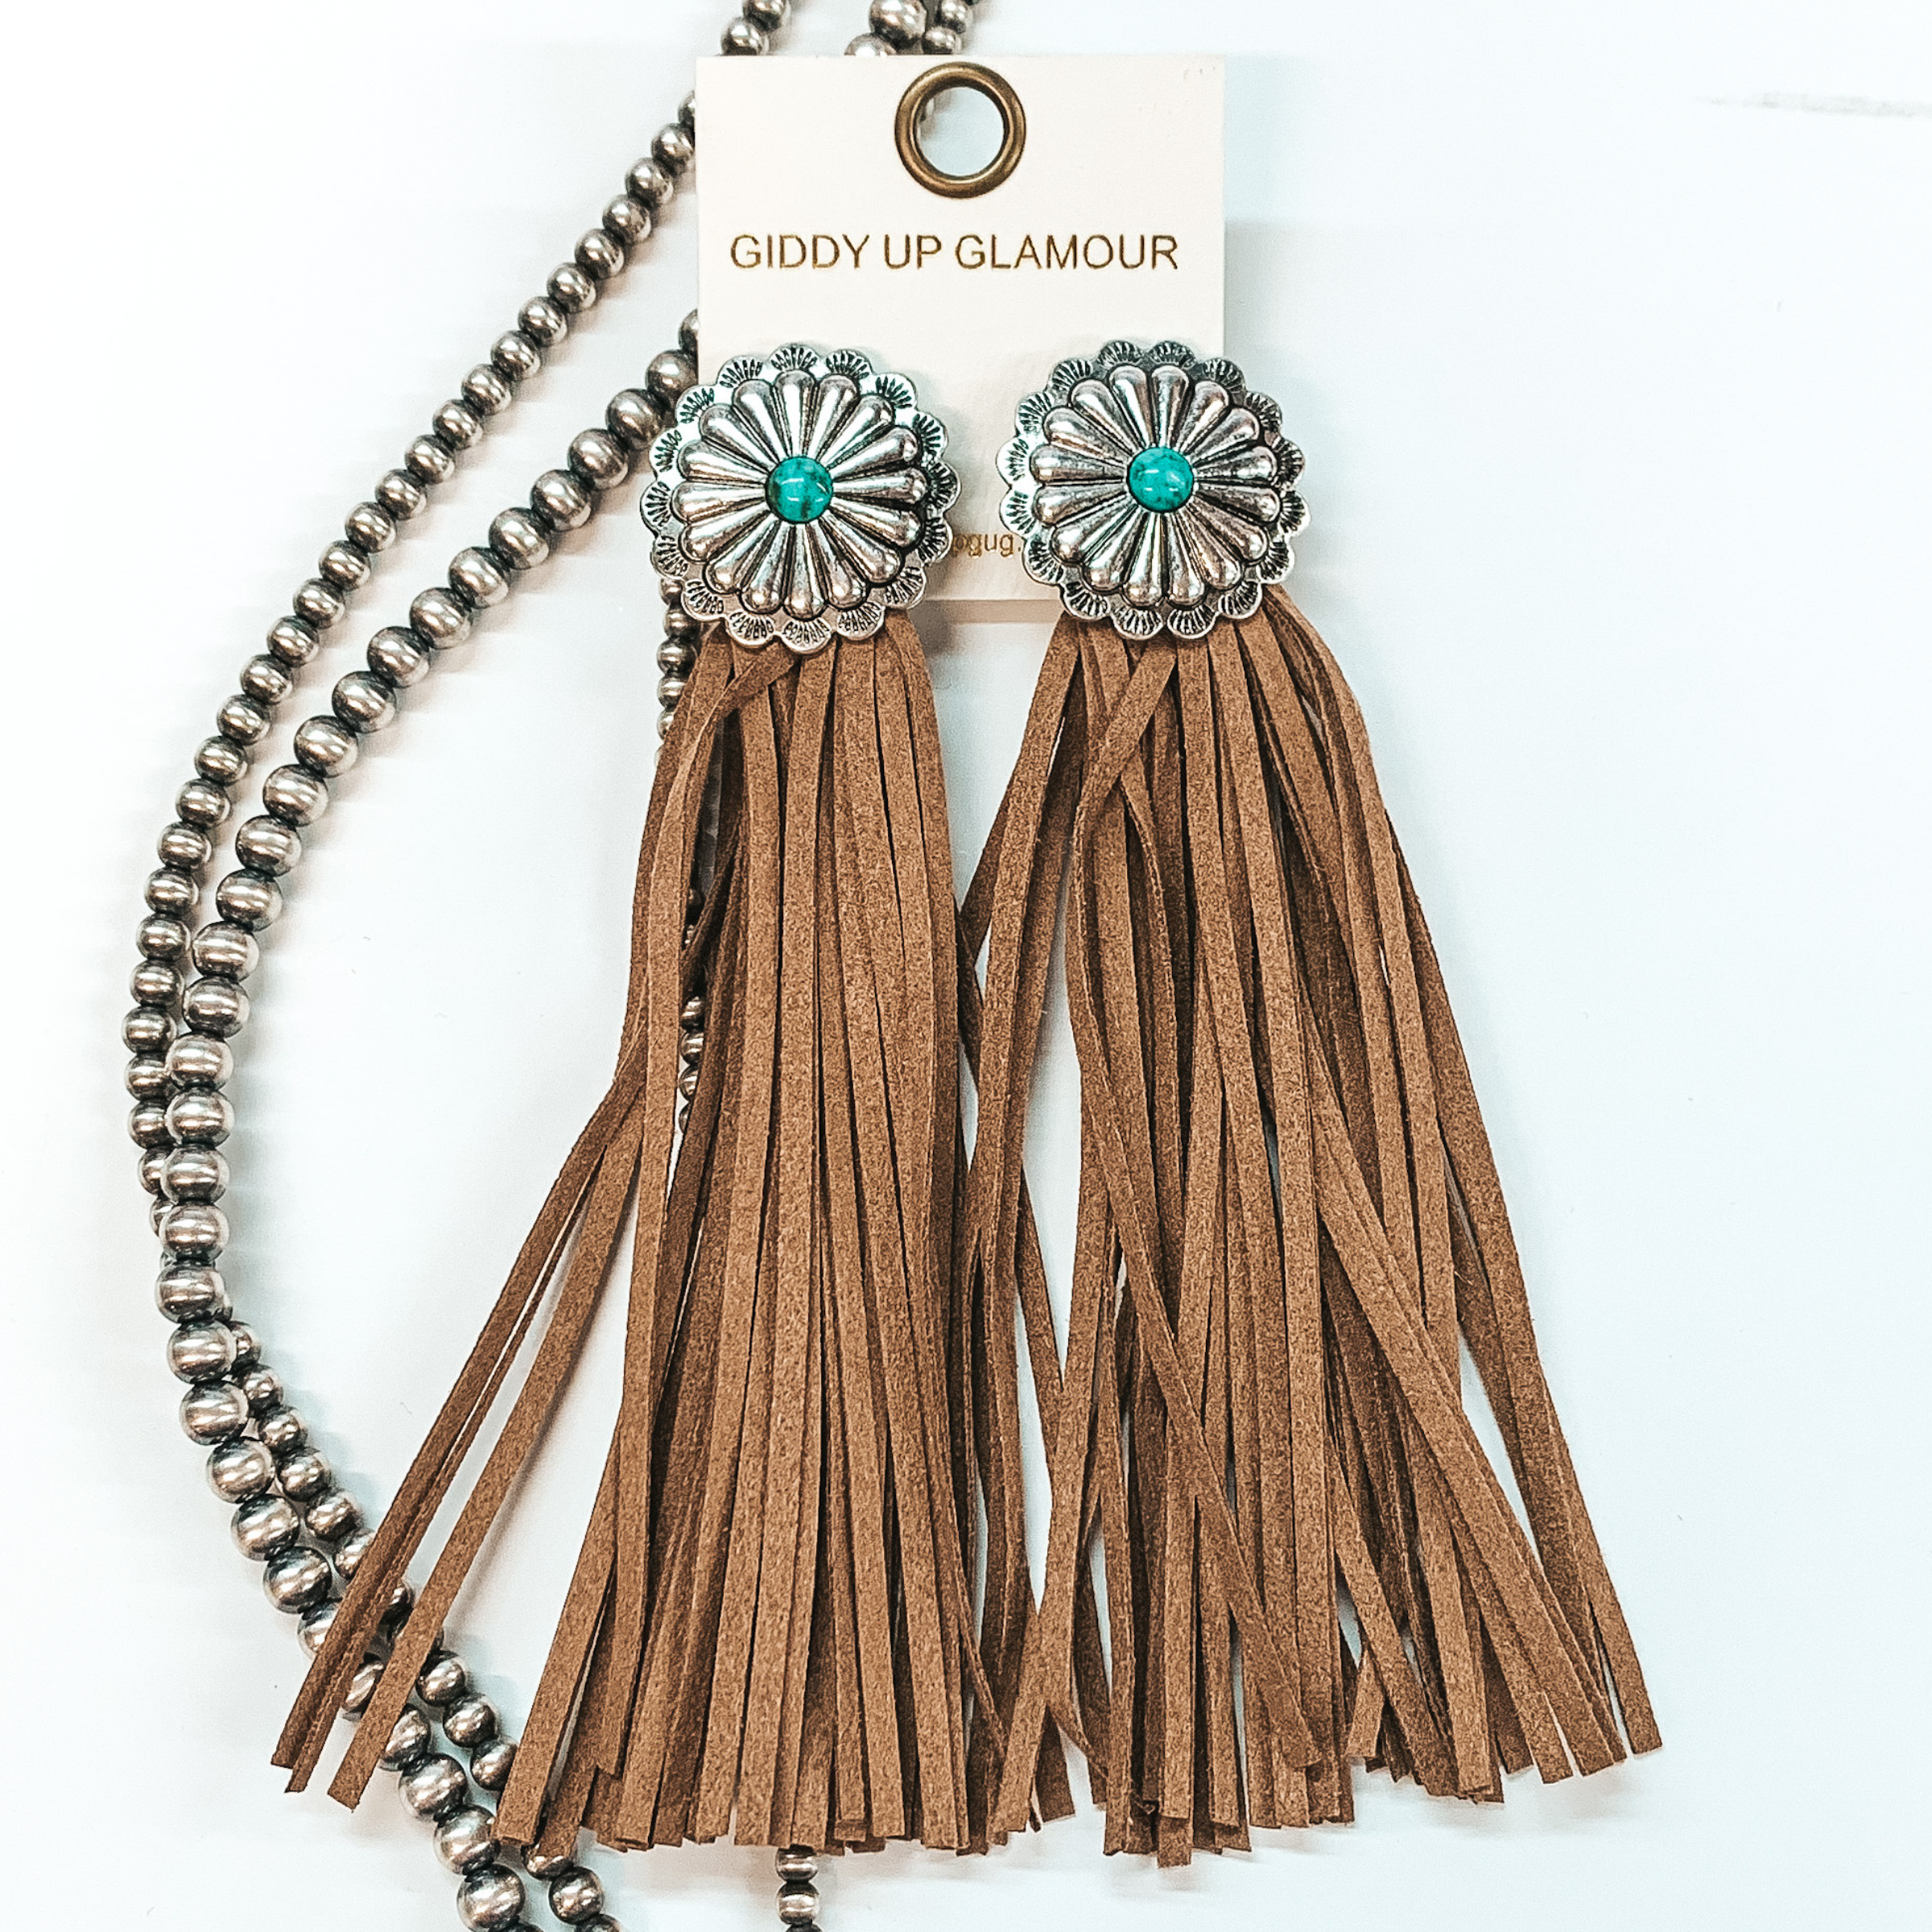 Post back concho earrings with a turquoise stone  in the center with brown faux leather tassels. Pictured in a white background with beads as decor.